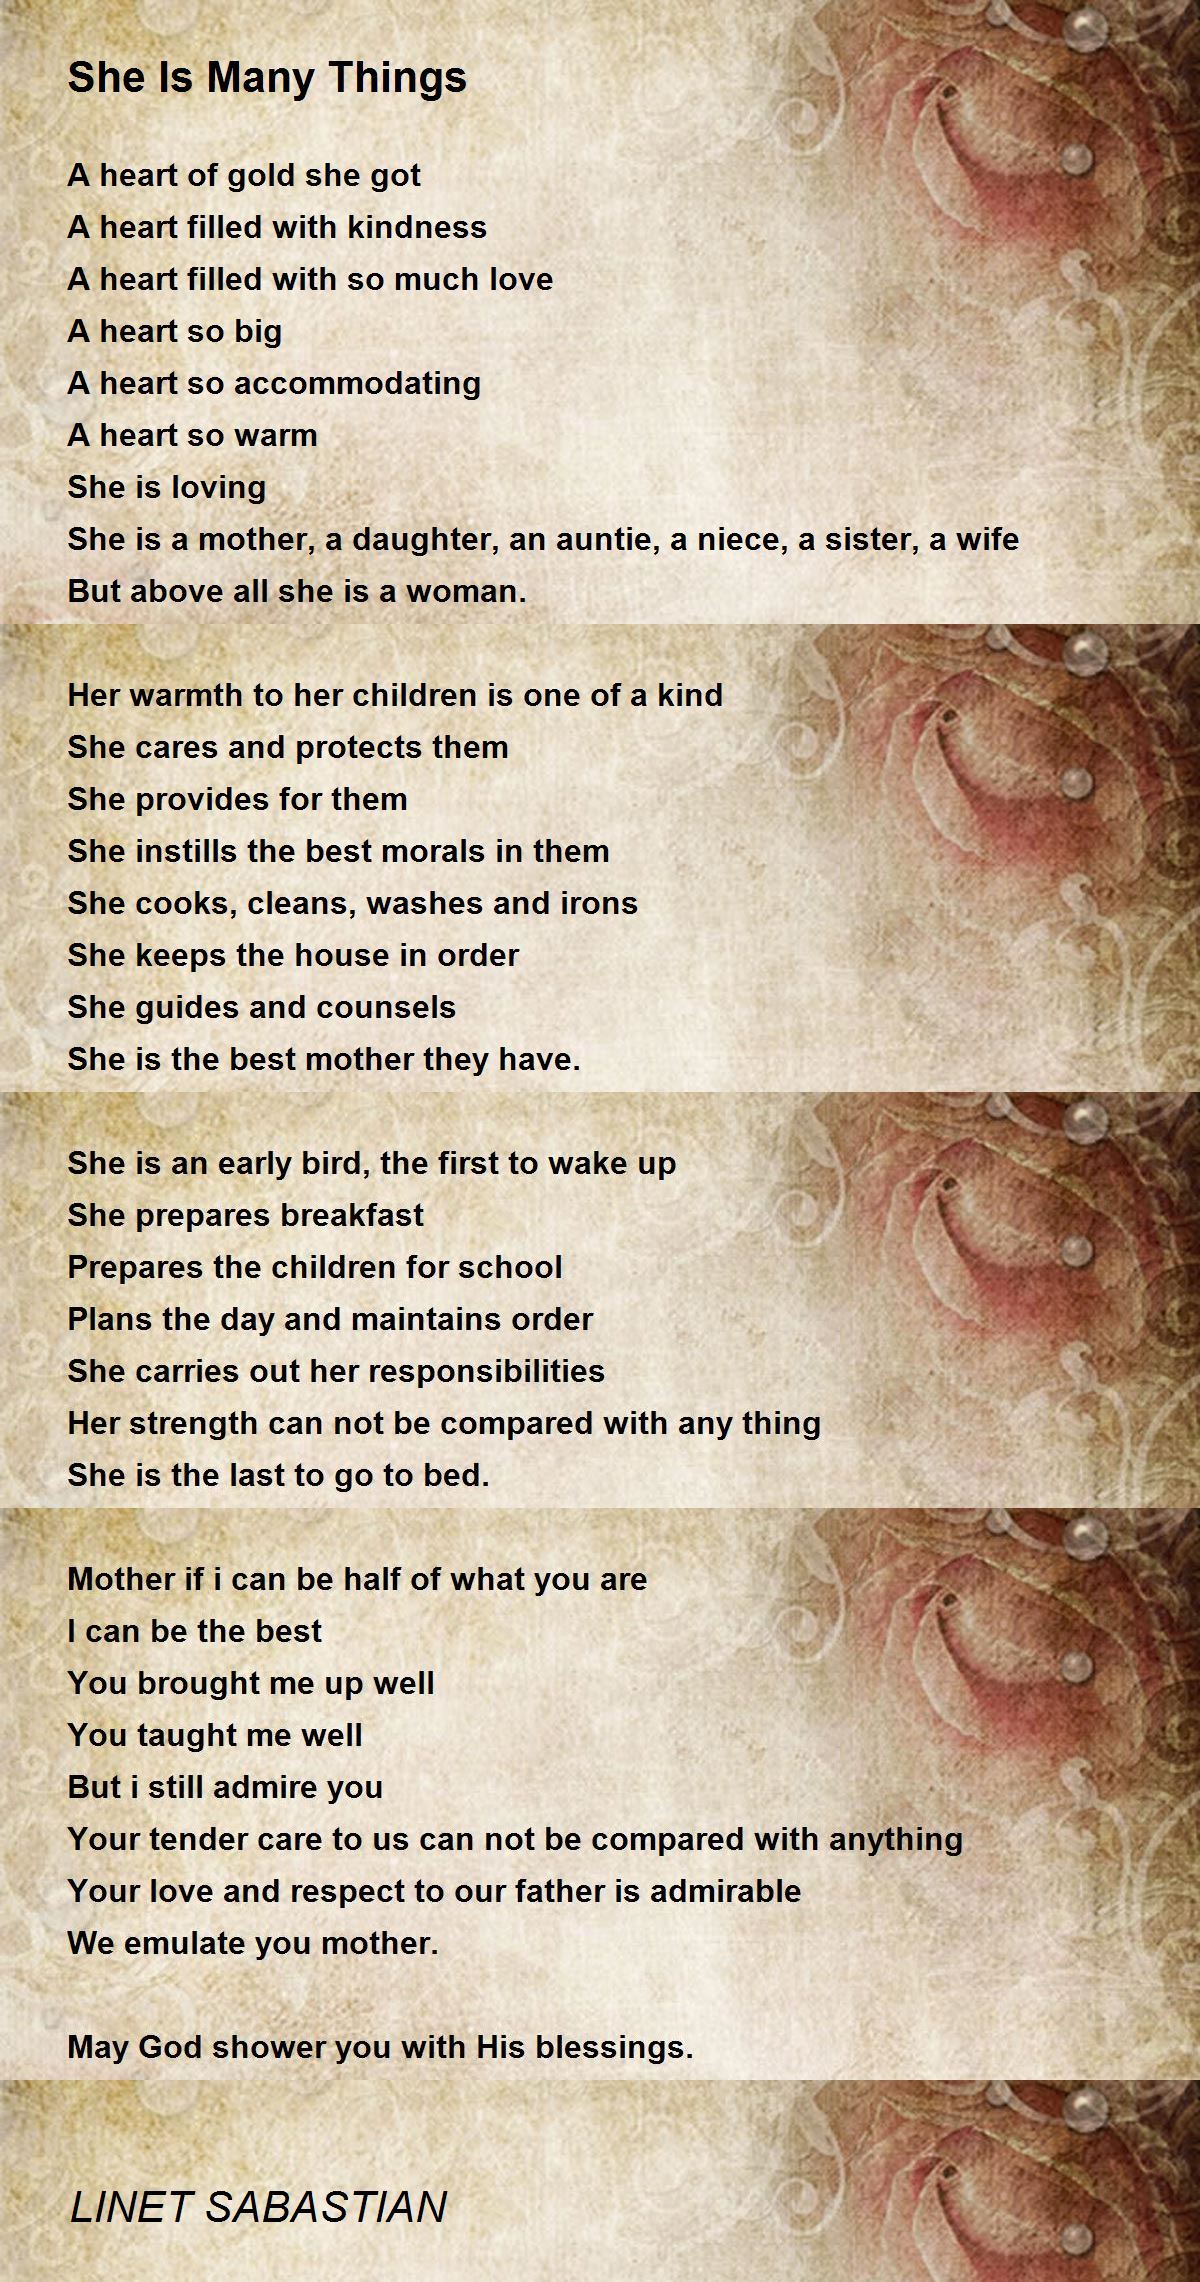 She Is Many Things by LINET SABASTIAN - She Is Many Things Poem